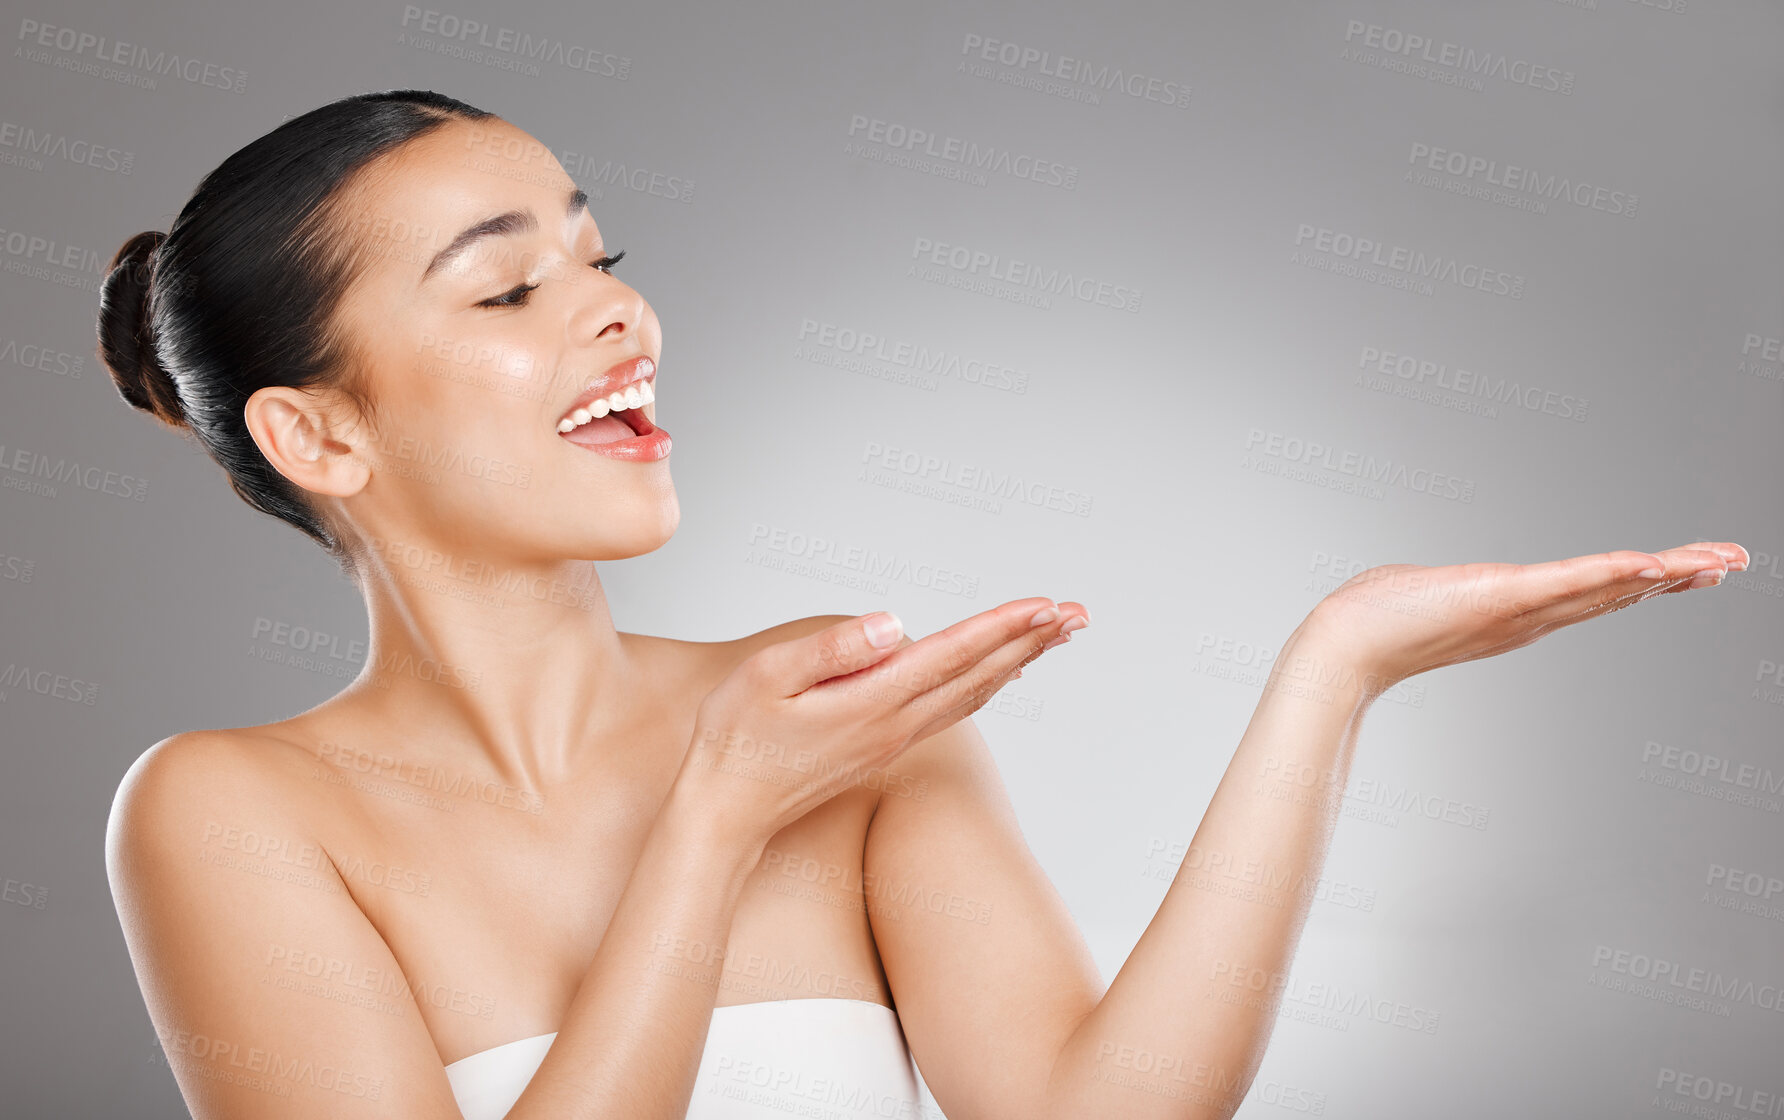 Buy stock photo Studio shot of an young woman pointing at copy space against a grey background